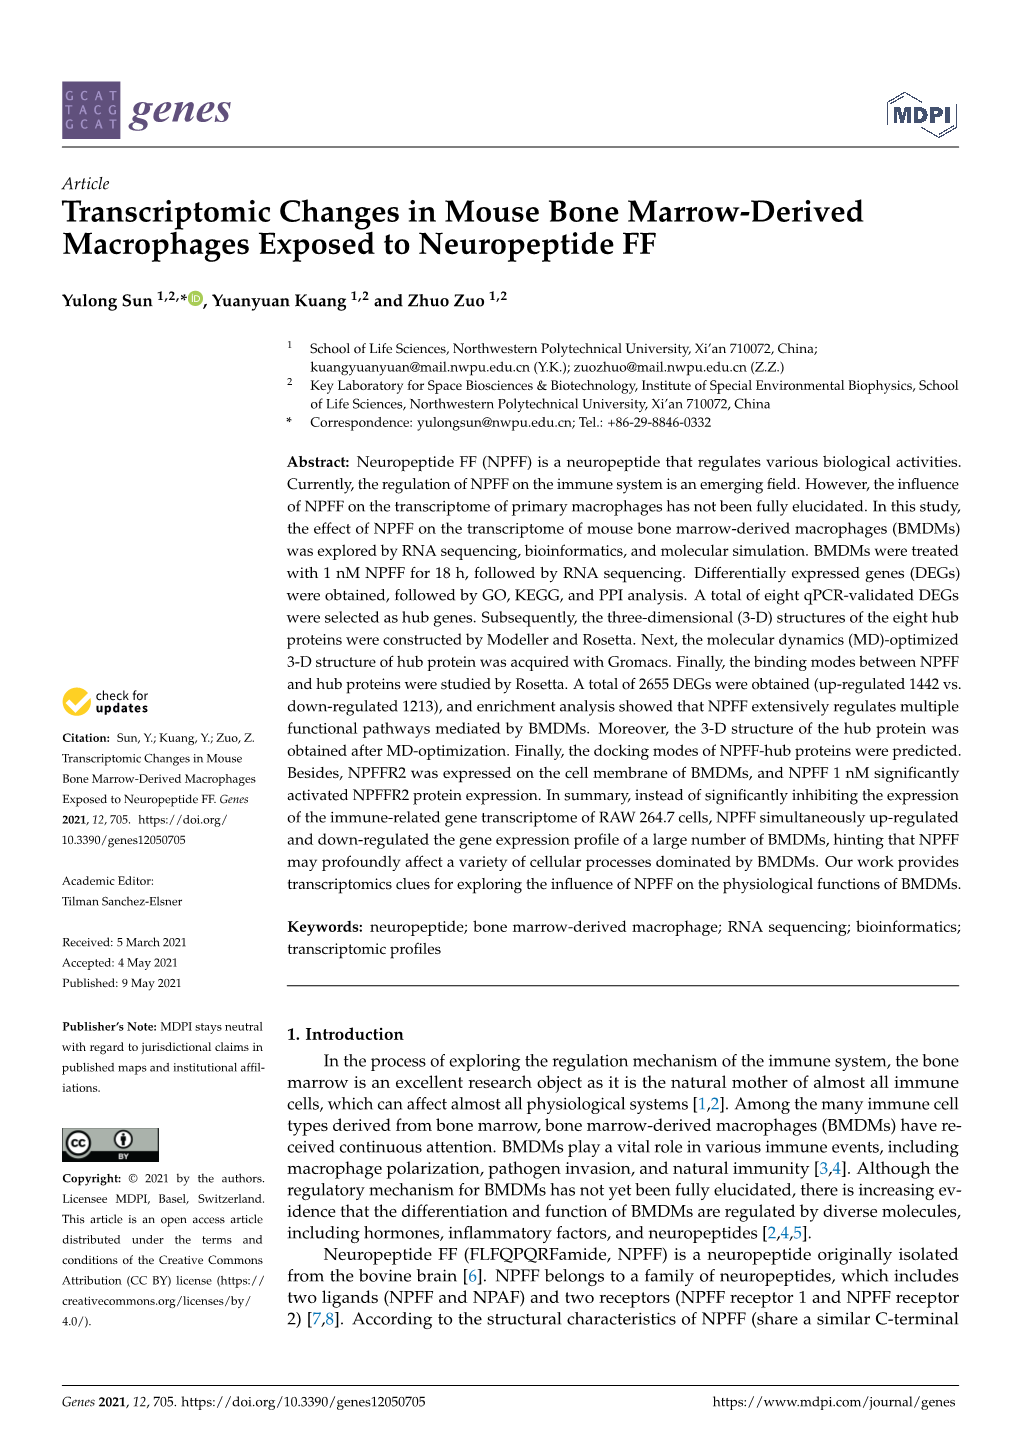 Transcriptomic Changes in Mouse Bone Marrow-Derived Macrophages Exposed to Neuropeptide FF